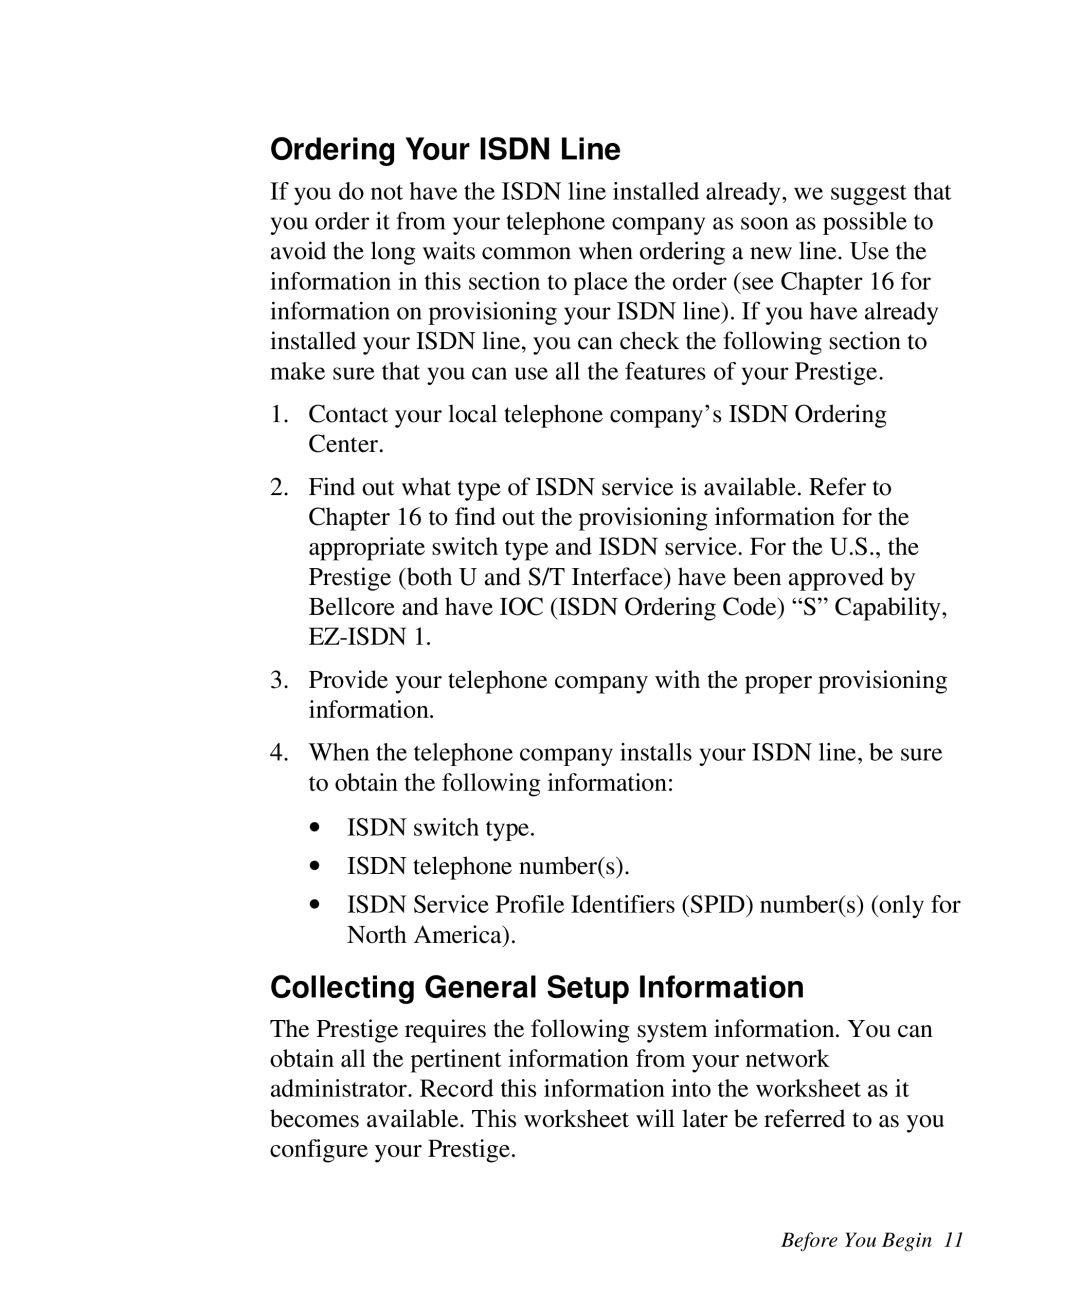 ZyXEL Communications 2864I user manual Ordering Your ISDN Line, Collecting General Setup Information 